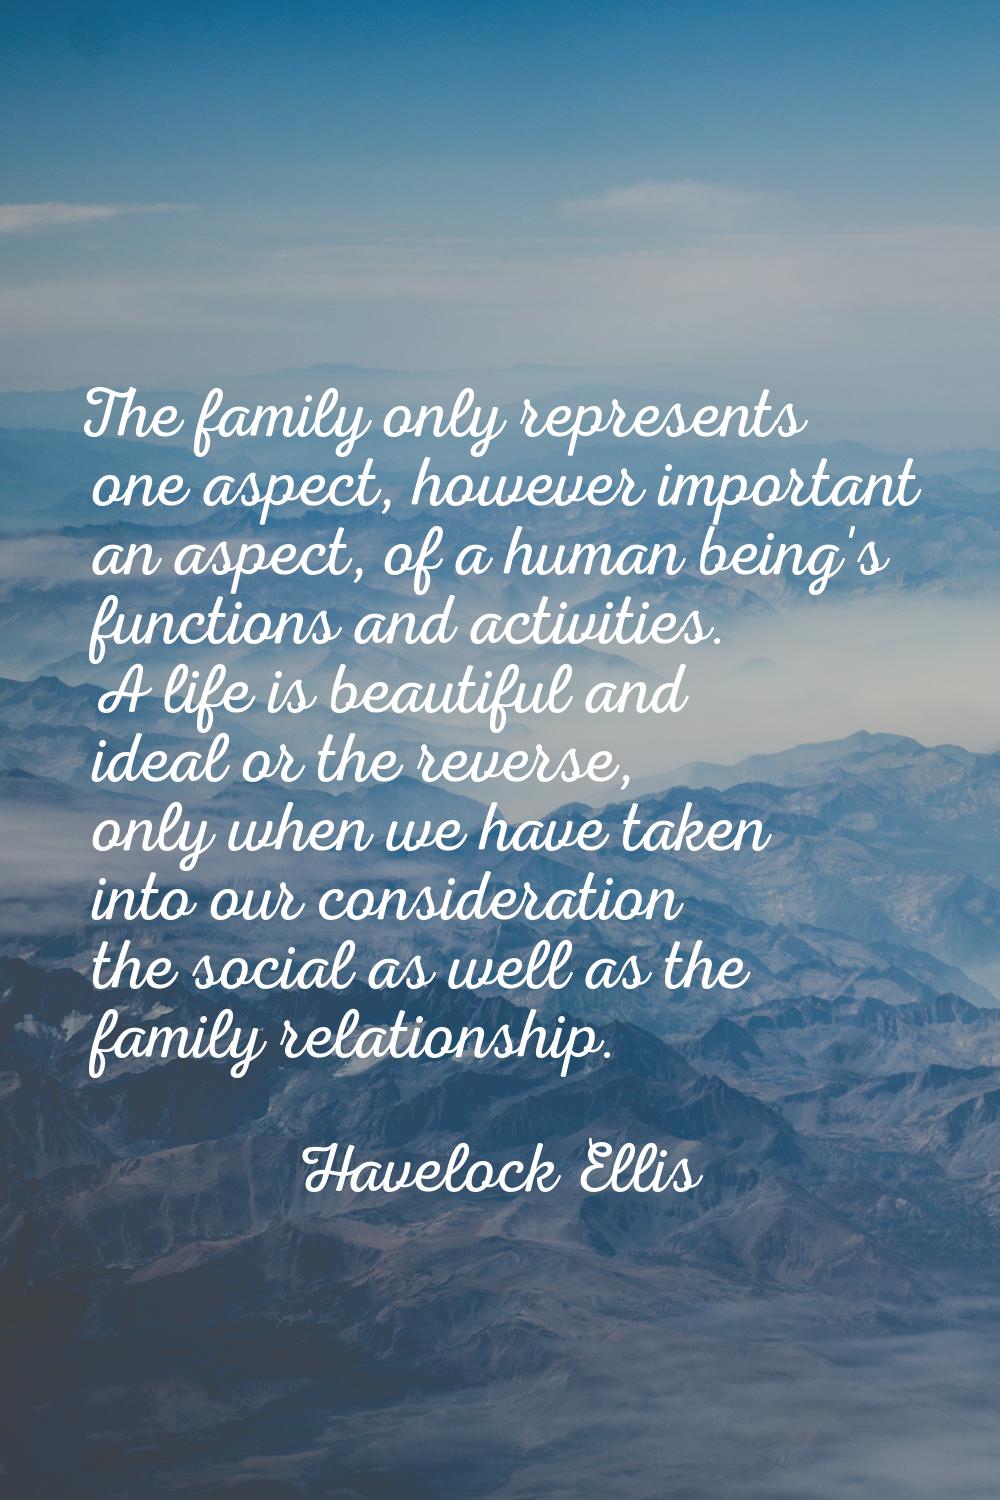 The family only represents one aspect, however important an aspect, of a human being's functions an